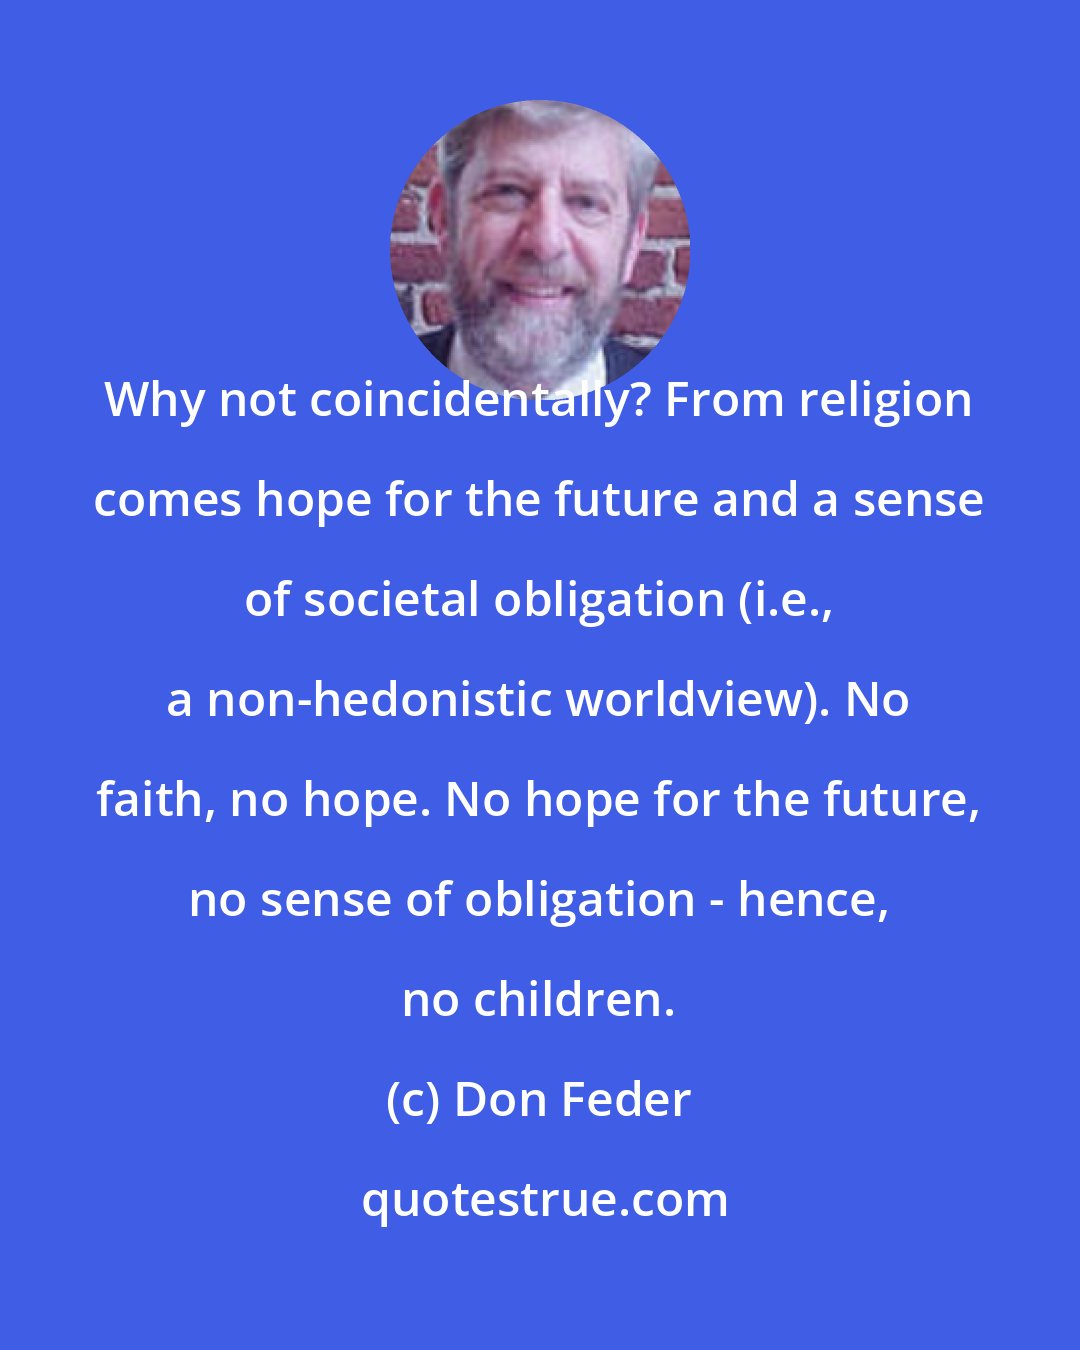 Don Feder: Why not coincidentally? From religion comes hope for the future and a sense of societal obligation (i.e., a non-hedonistic worldview). No faith, no hope. No hope for the future, no sense of obligation - hence, no children.